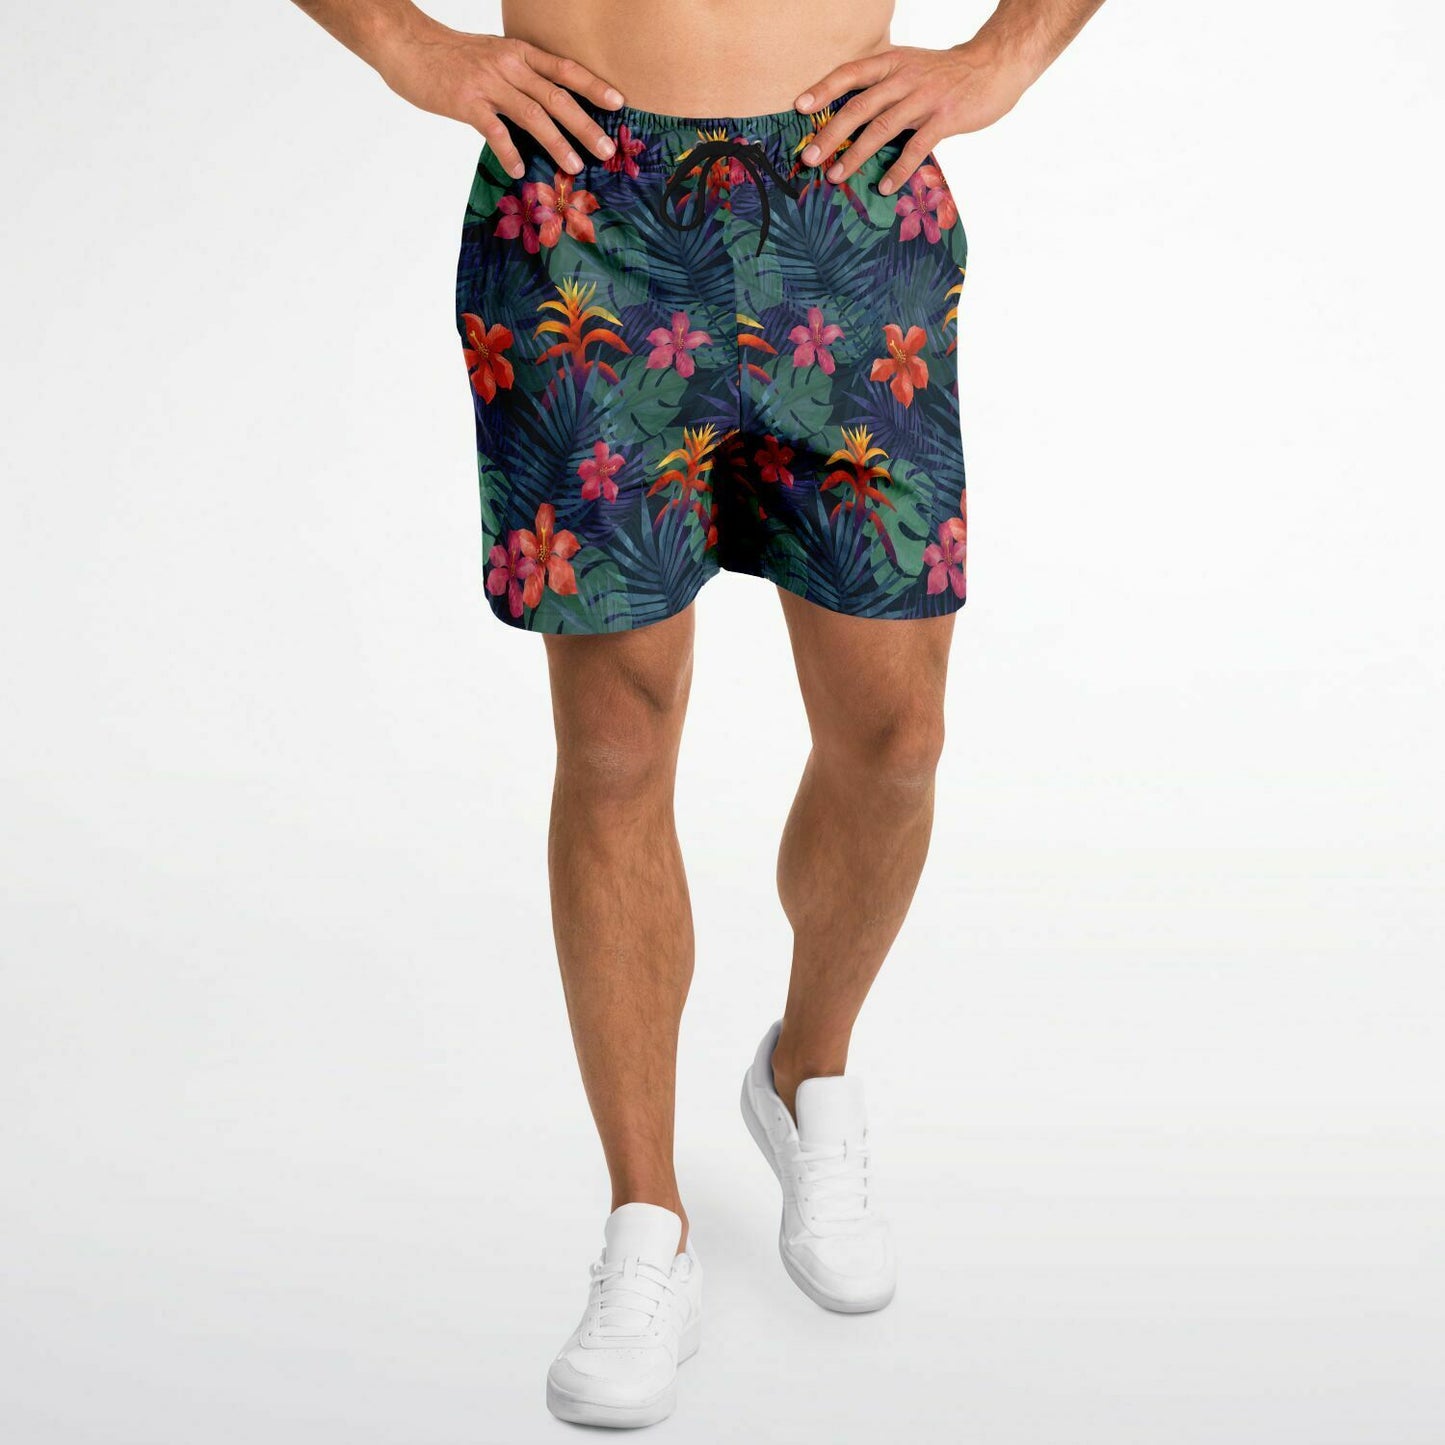 Tropical Men Mid Length Shorts, Jungle Flowers Green Leaves Beach Casual with Pockets Drawstring Casual Designer Plus Size Summer Shorts